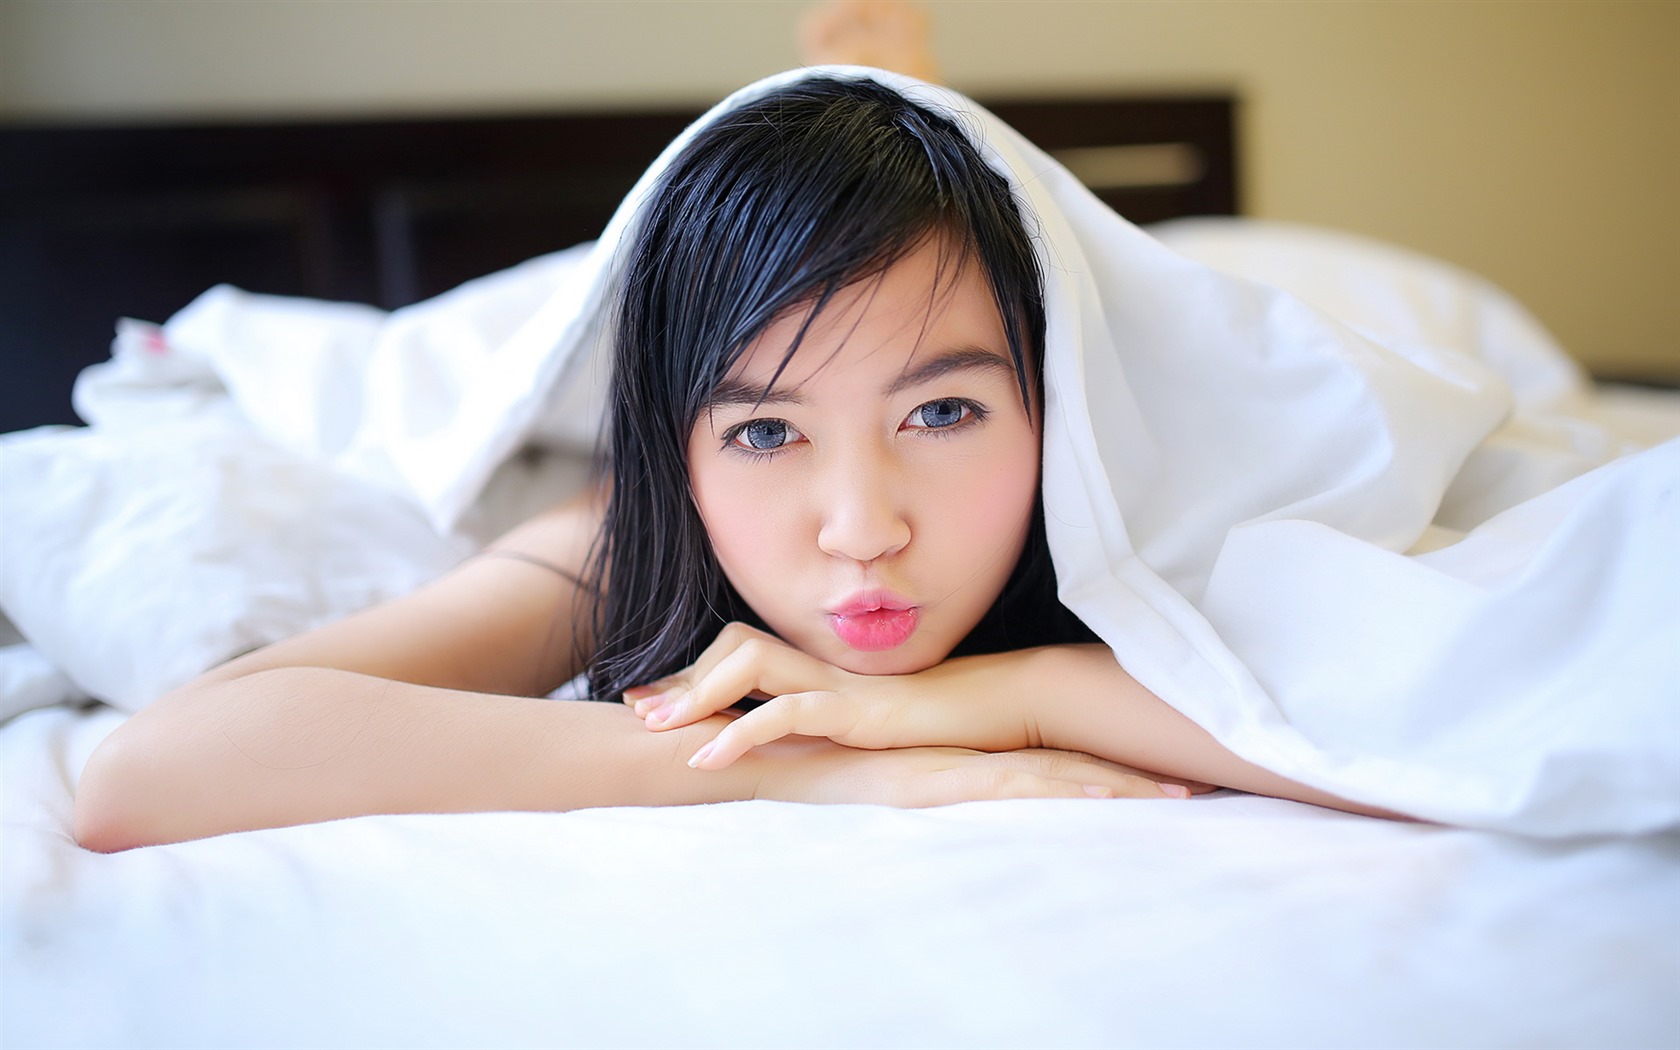 Pure and lovely young Asian girl HD wallpapers collection (2) #10 - 1680x1050